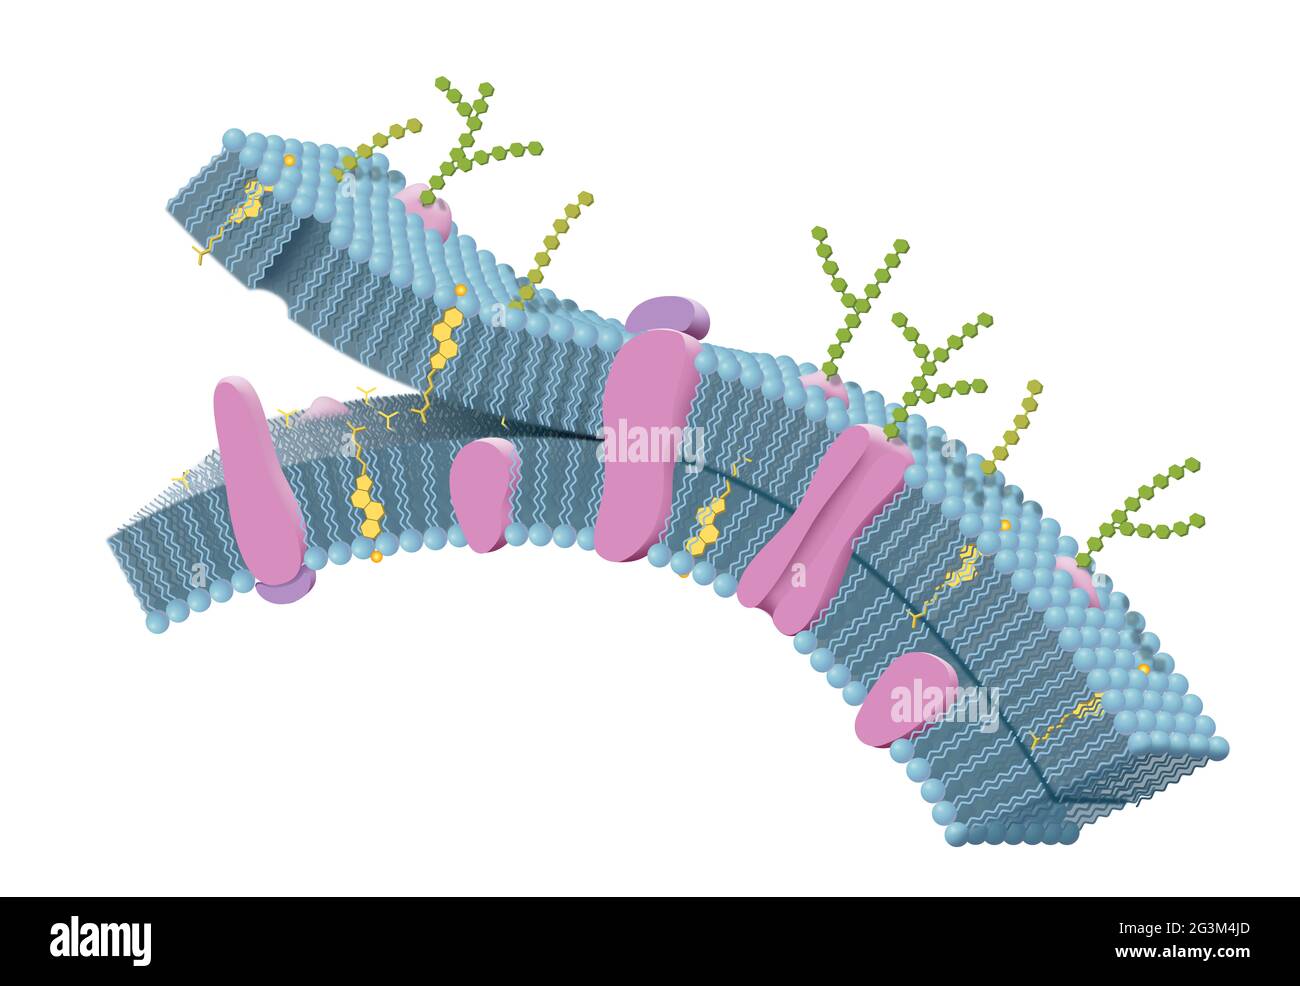 Cell membrane with phospholipids, cholesterol, intrinsic and extrinsic proteins. 3D illustration Stock Photo